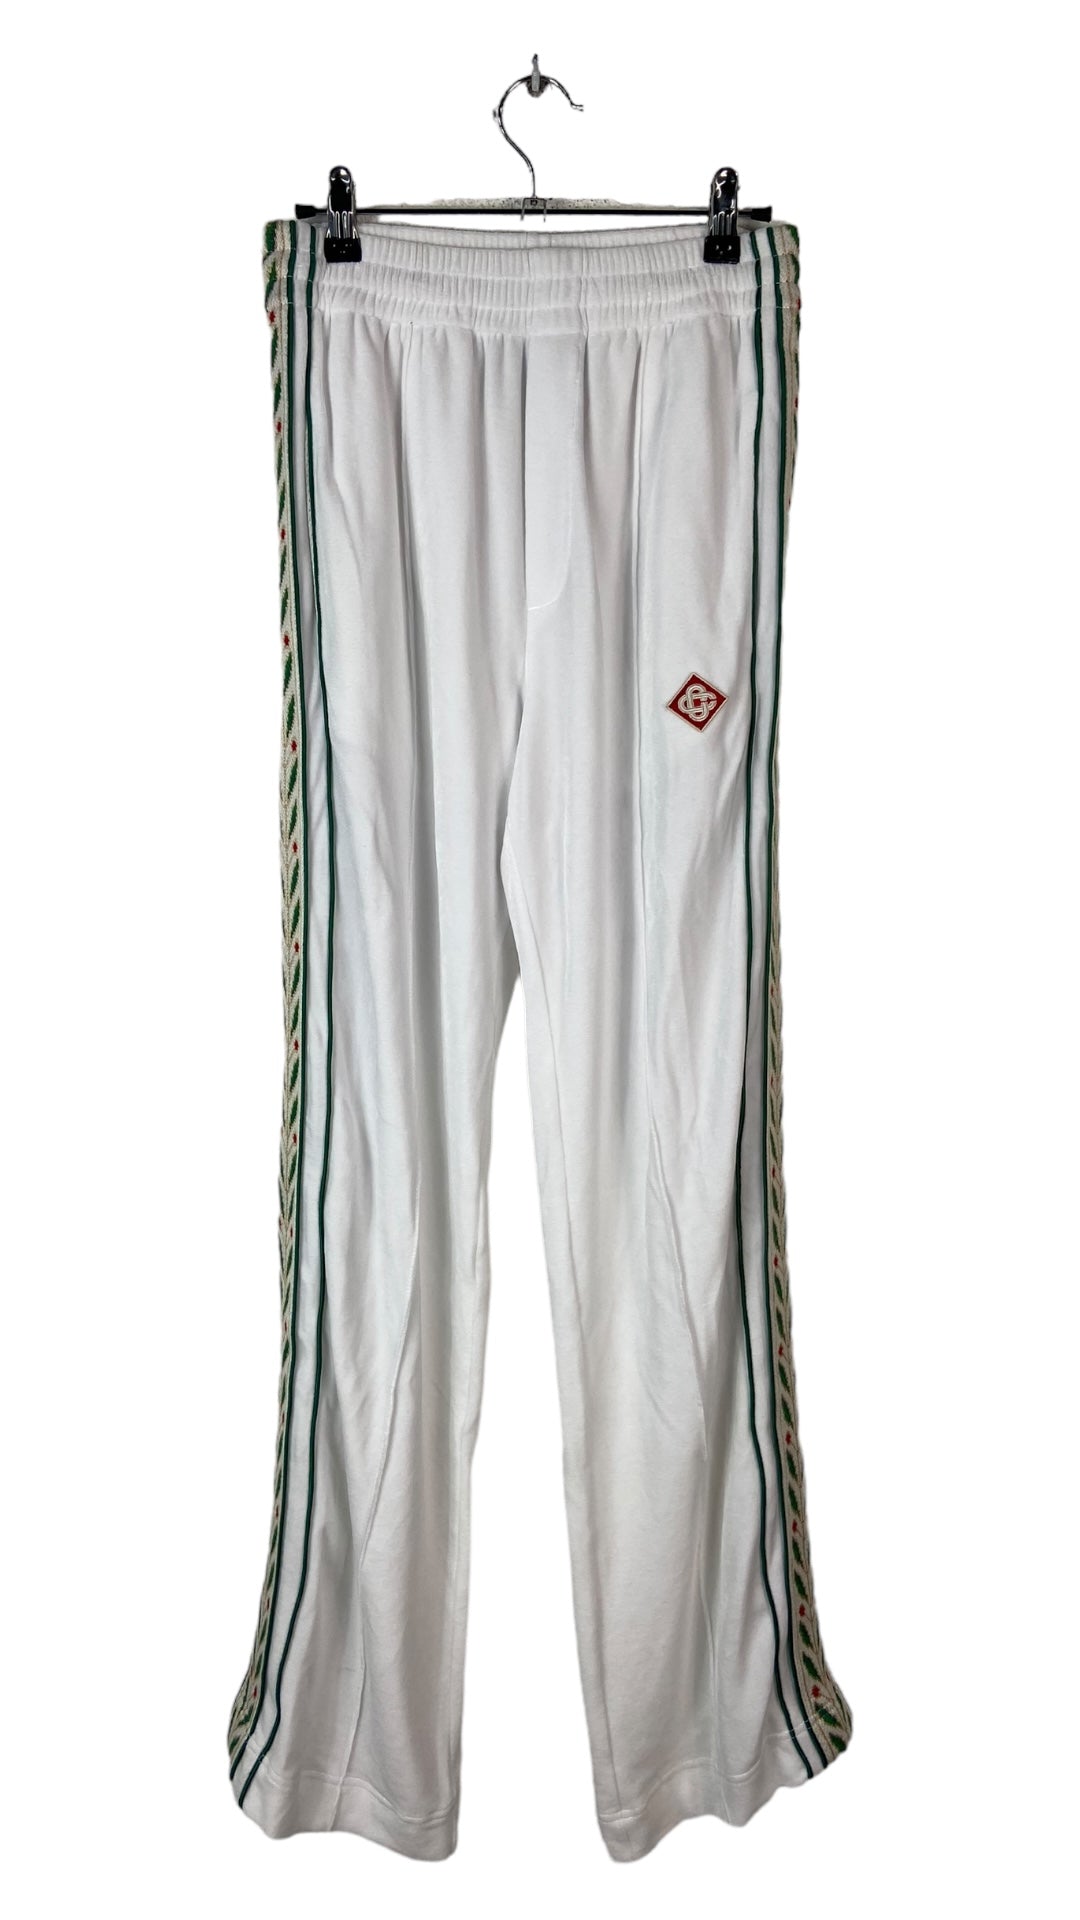 Preowned Casablanca Logo Embroidered Track Pants Sz S